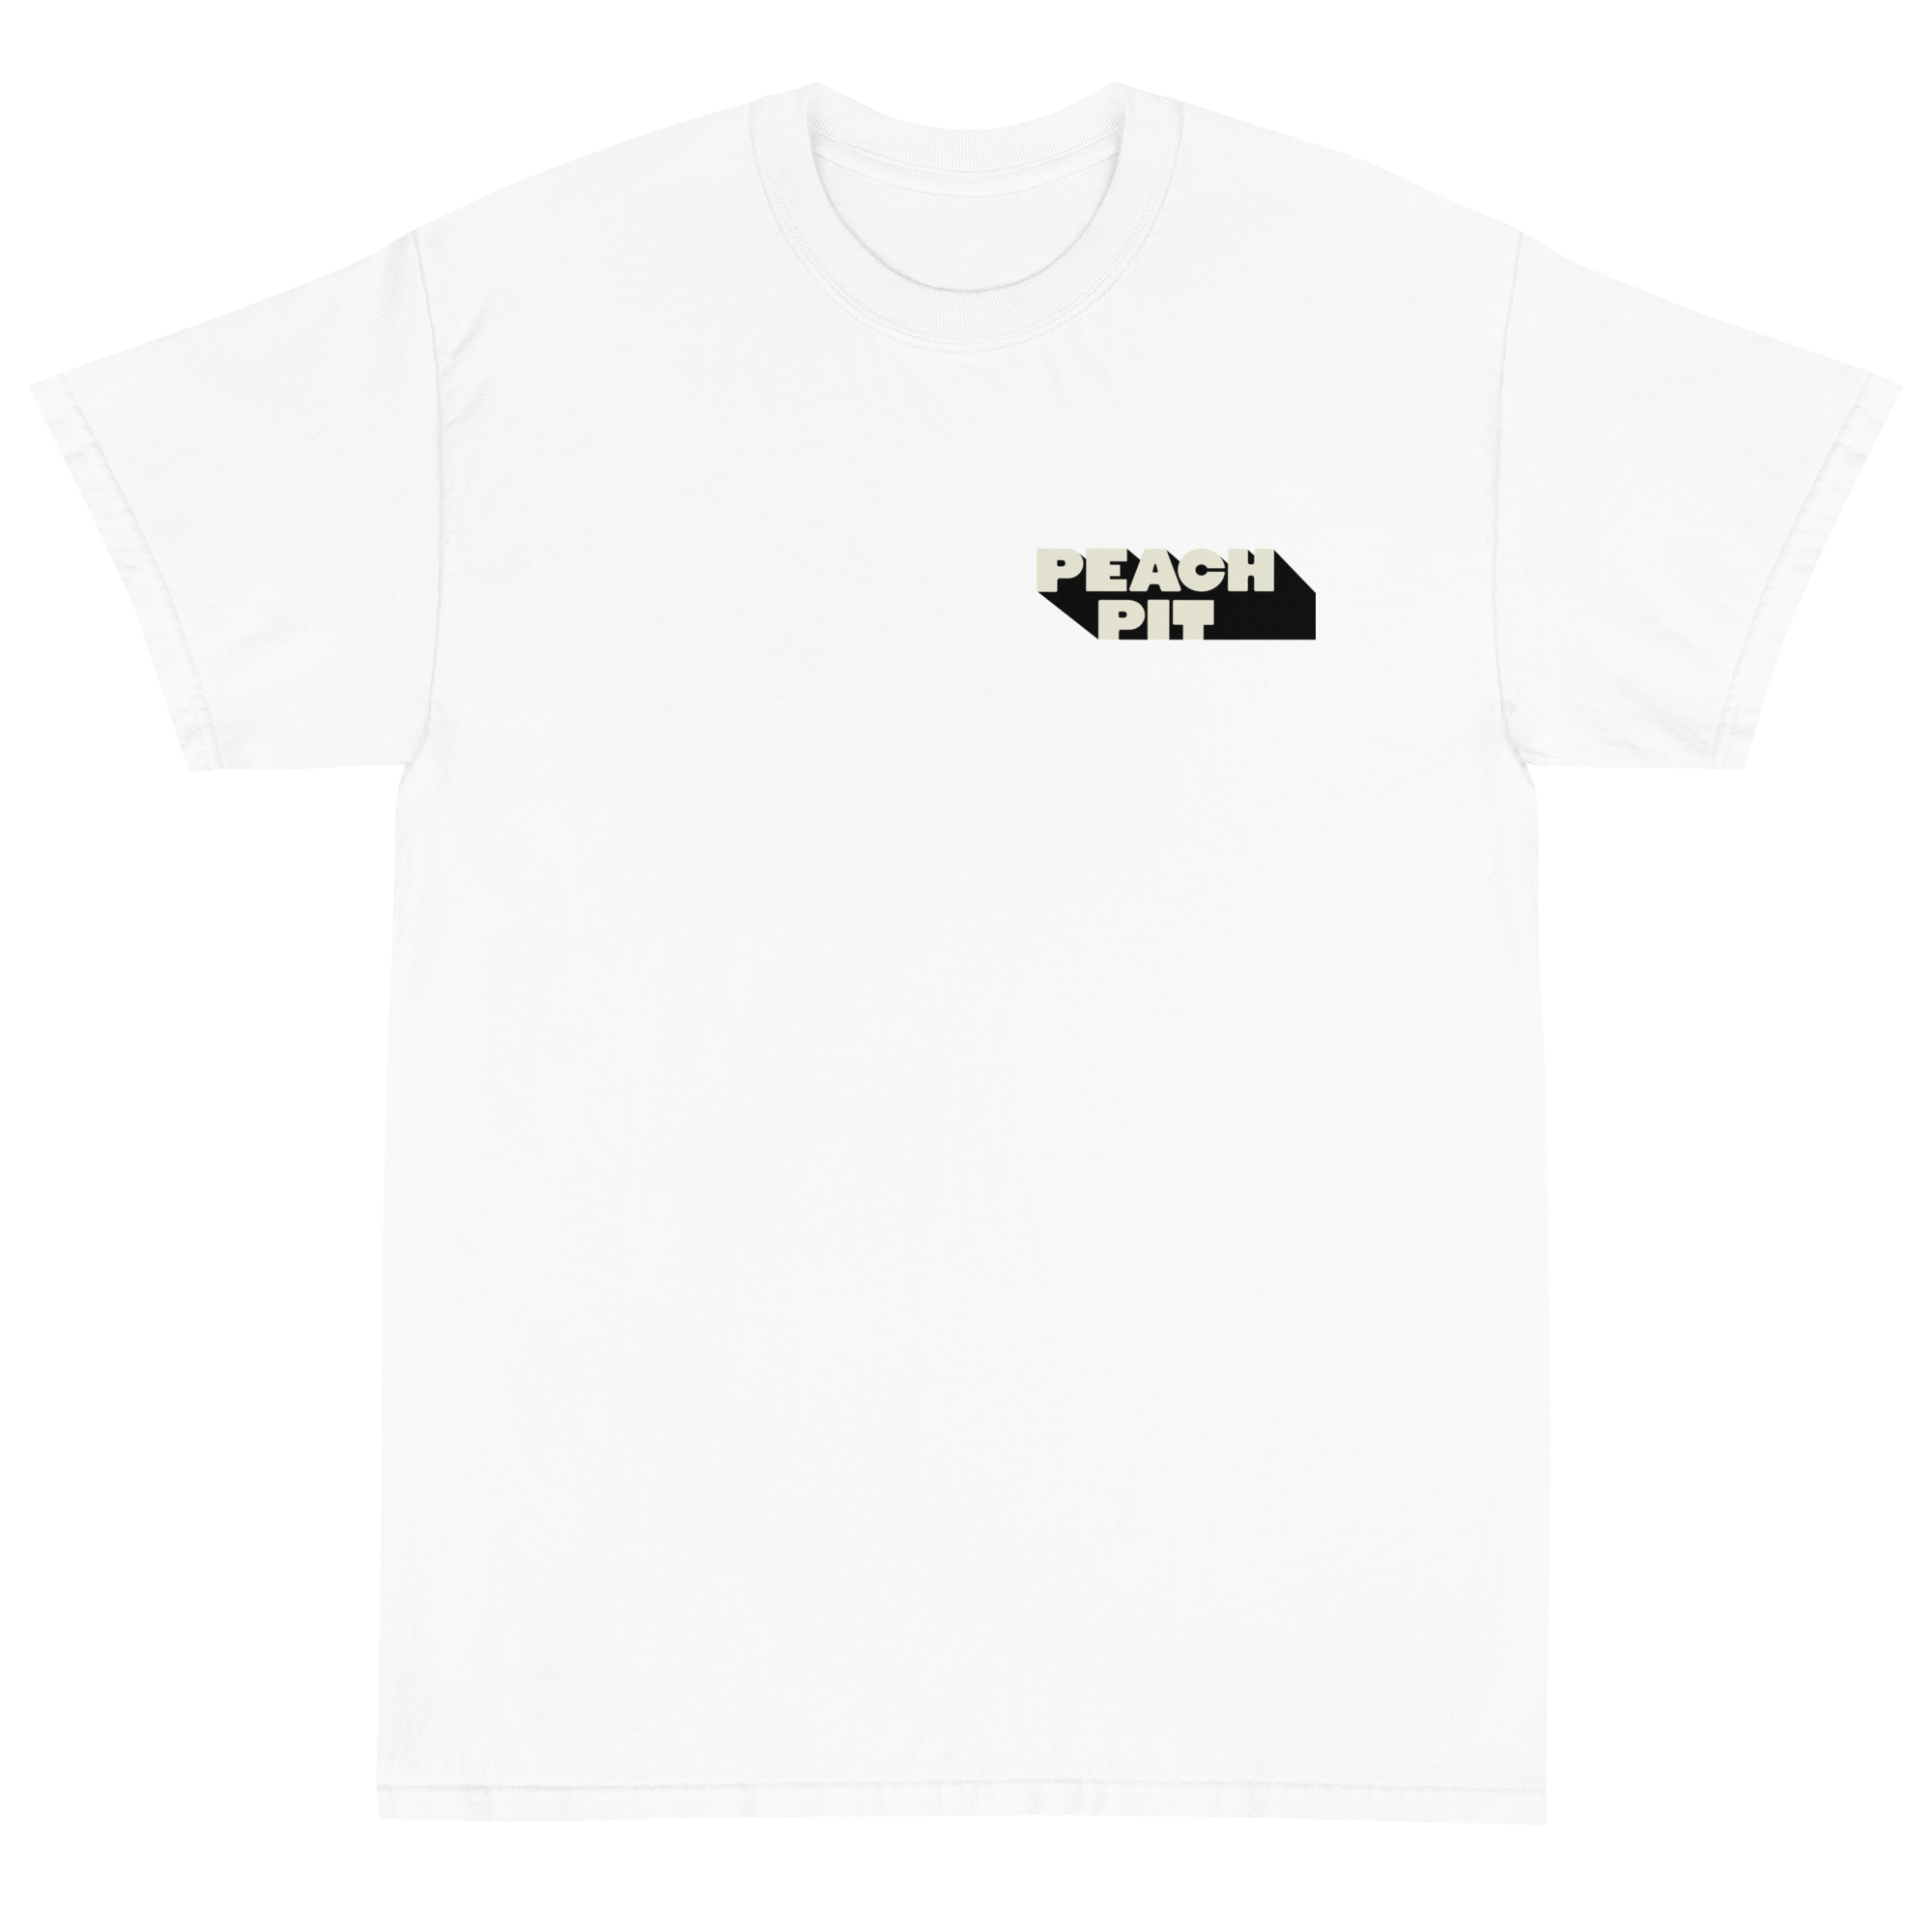 Tour Tee (From 2 to 3 Tour Edition)